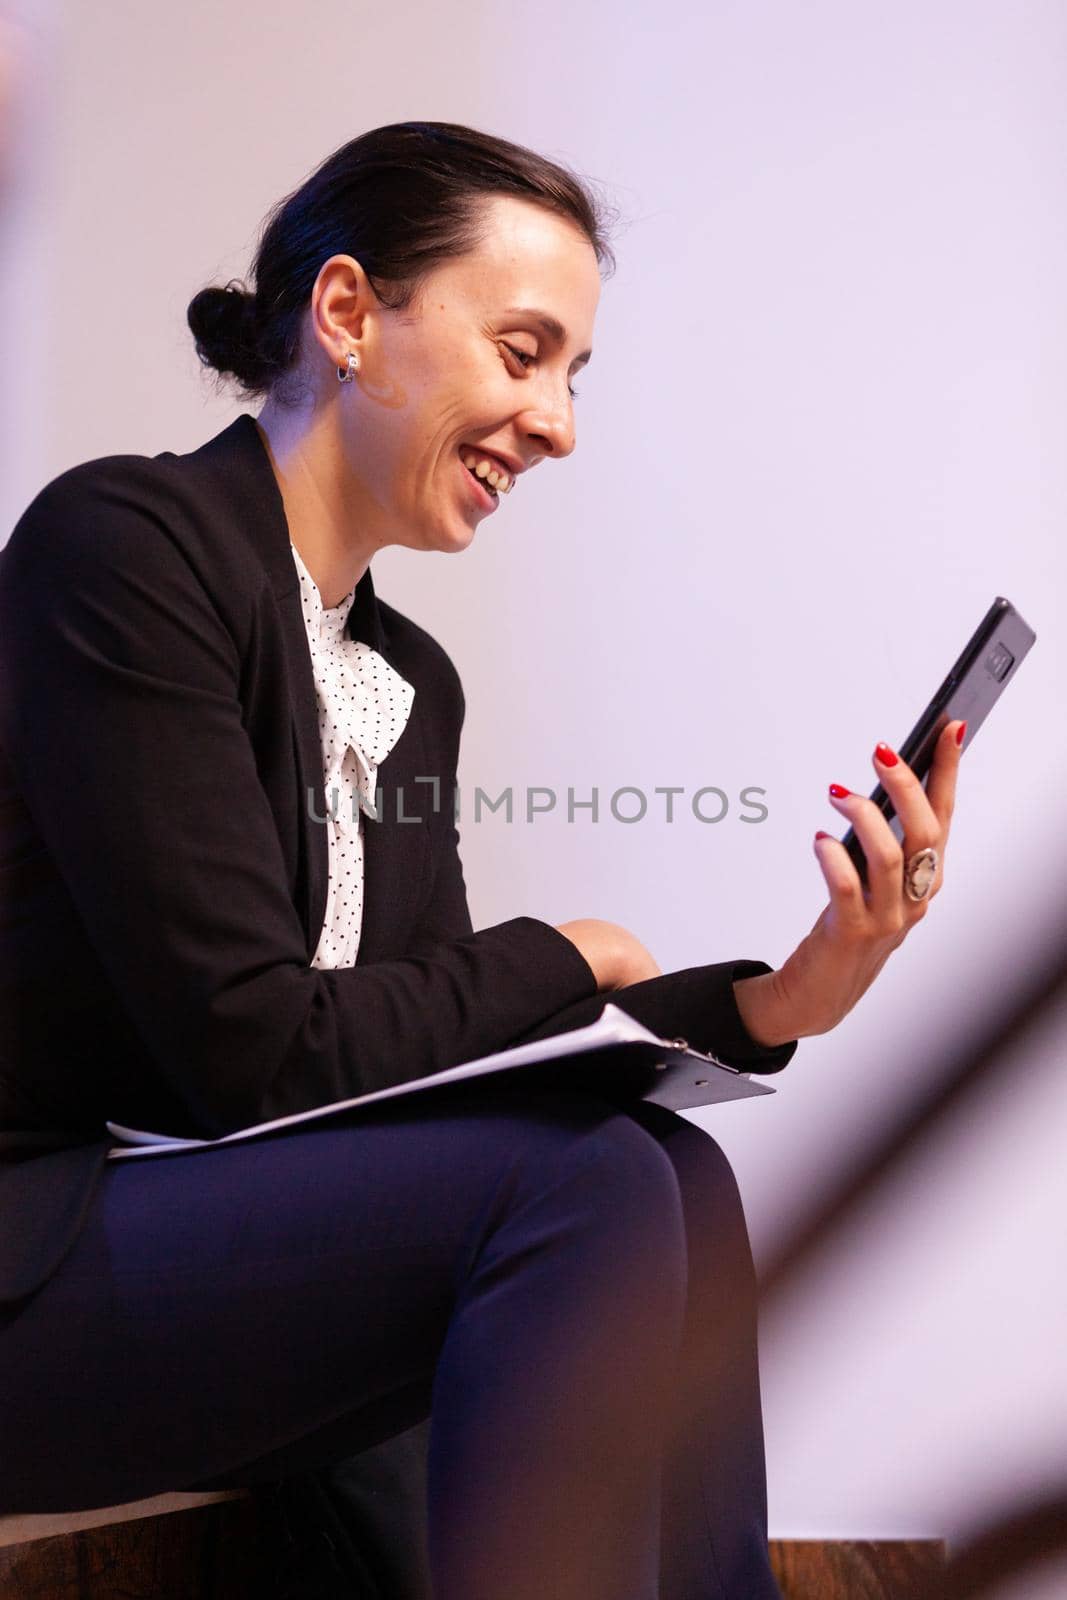 Overworked businesswoman smiling during video call about project deadline. Entrepreneur talking with client using smartphone for video call sitting on stairs.